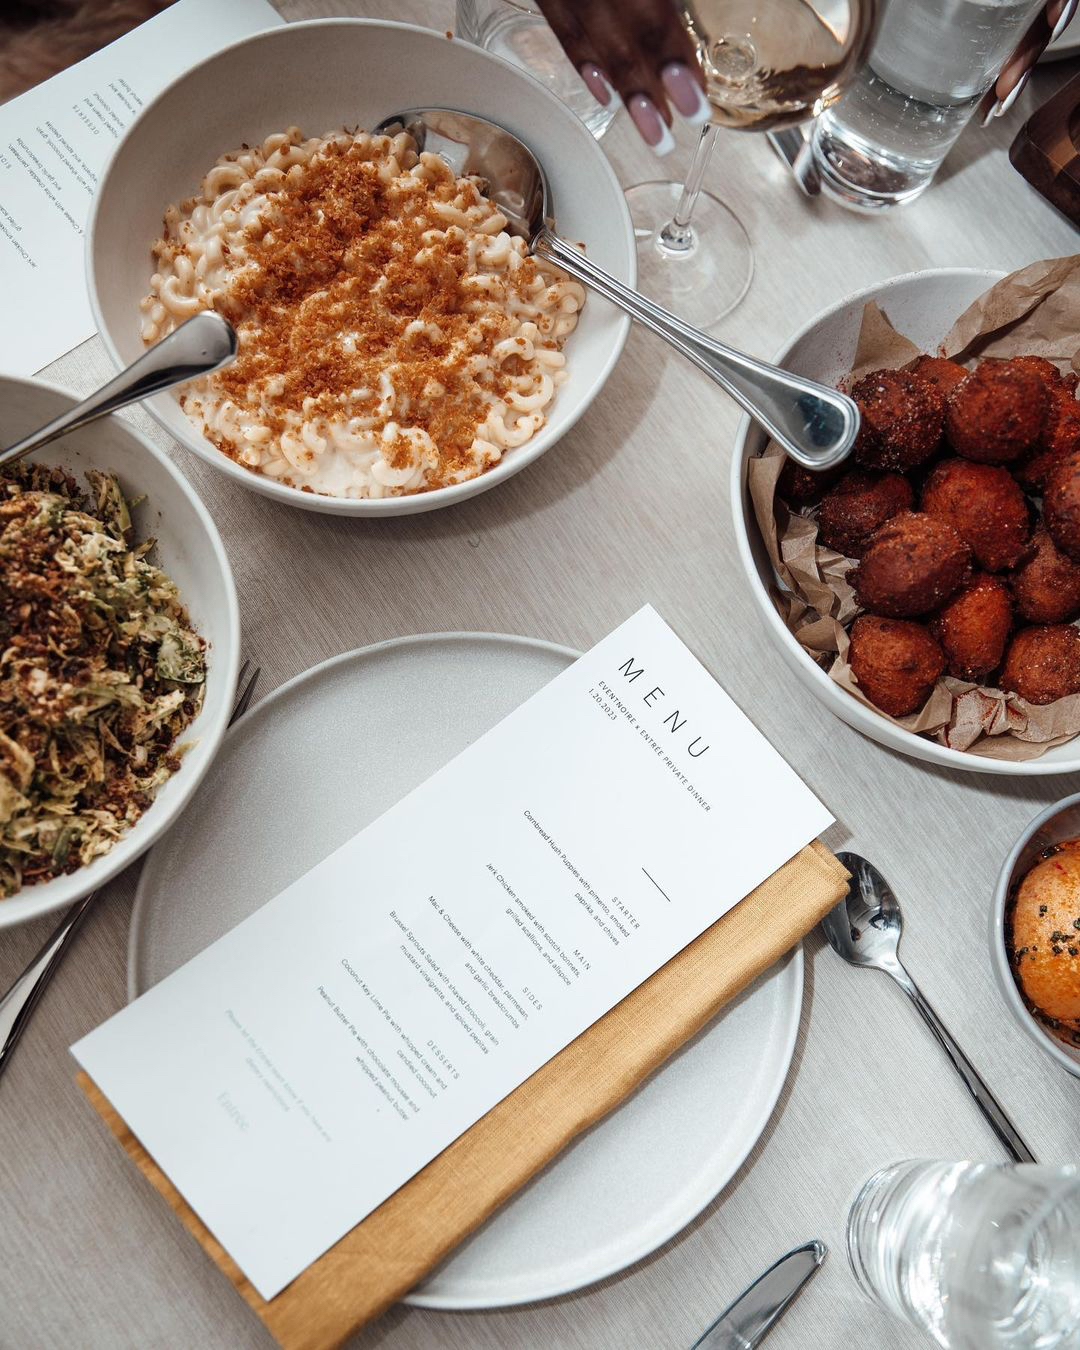 “Jerkhouse”: Eventnoire Partners with Entrée for “Everybody Eats” Chicago